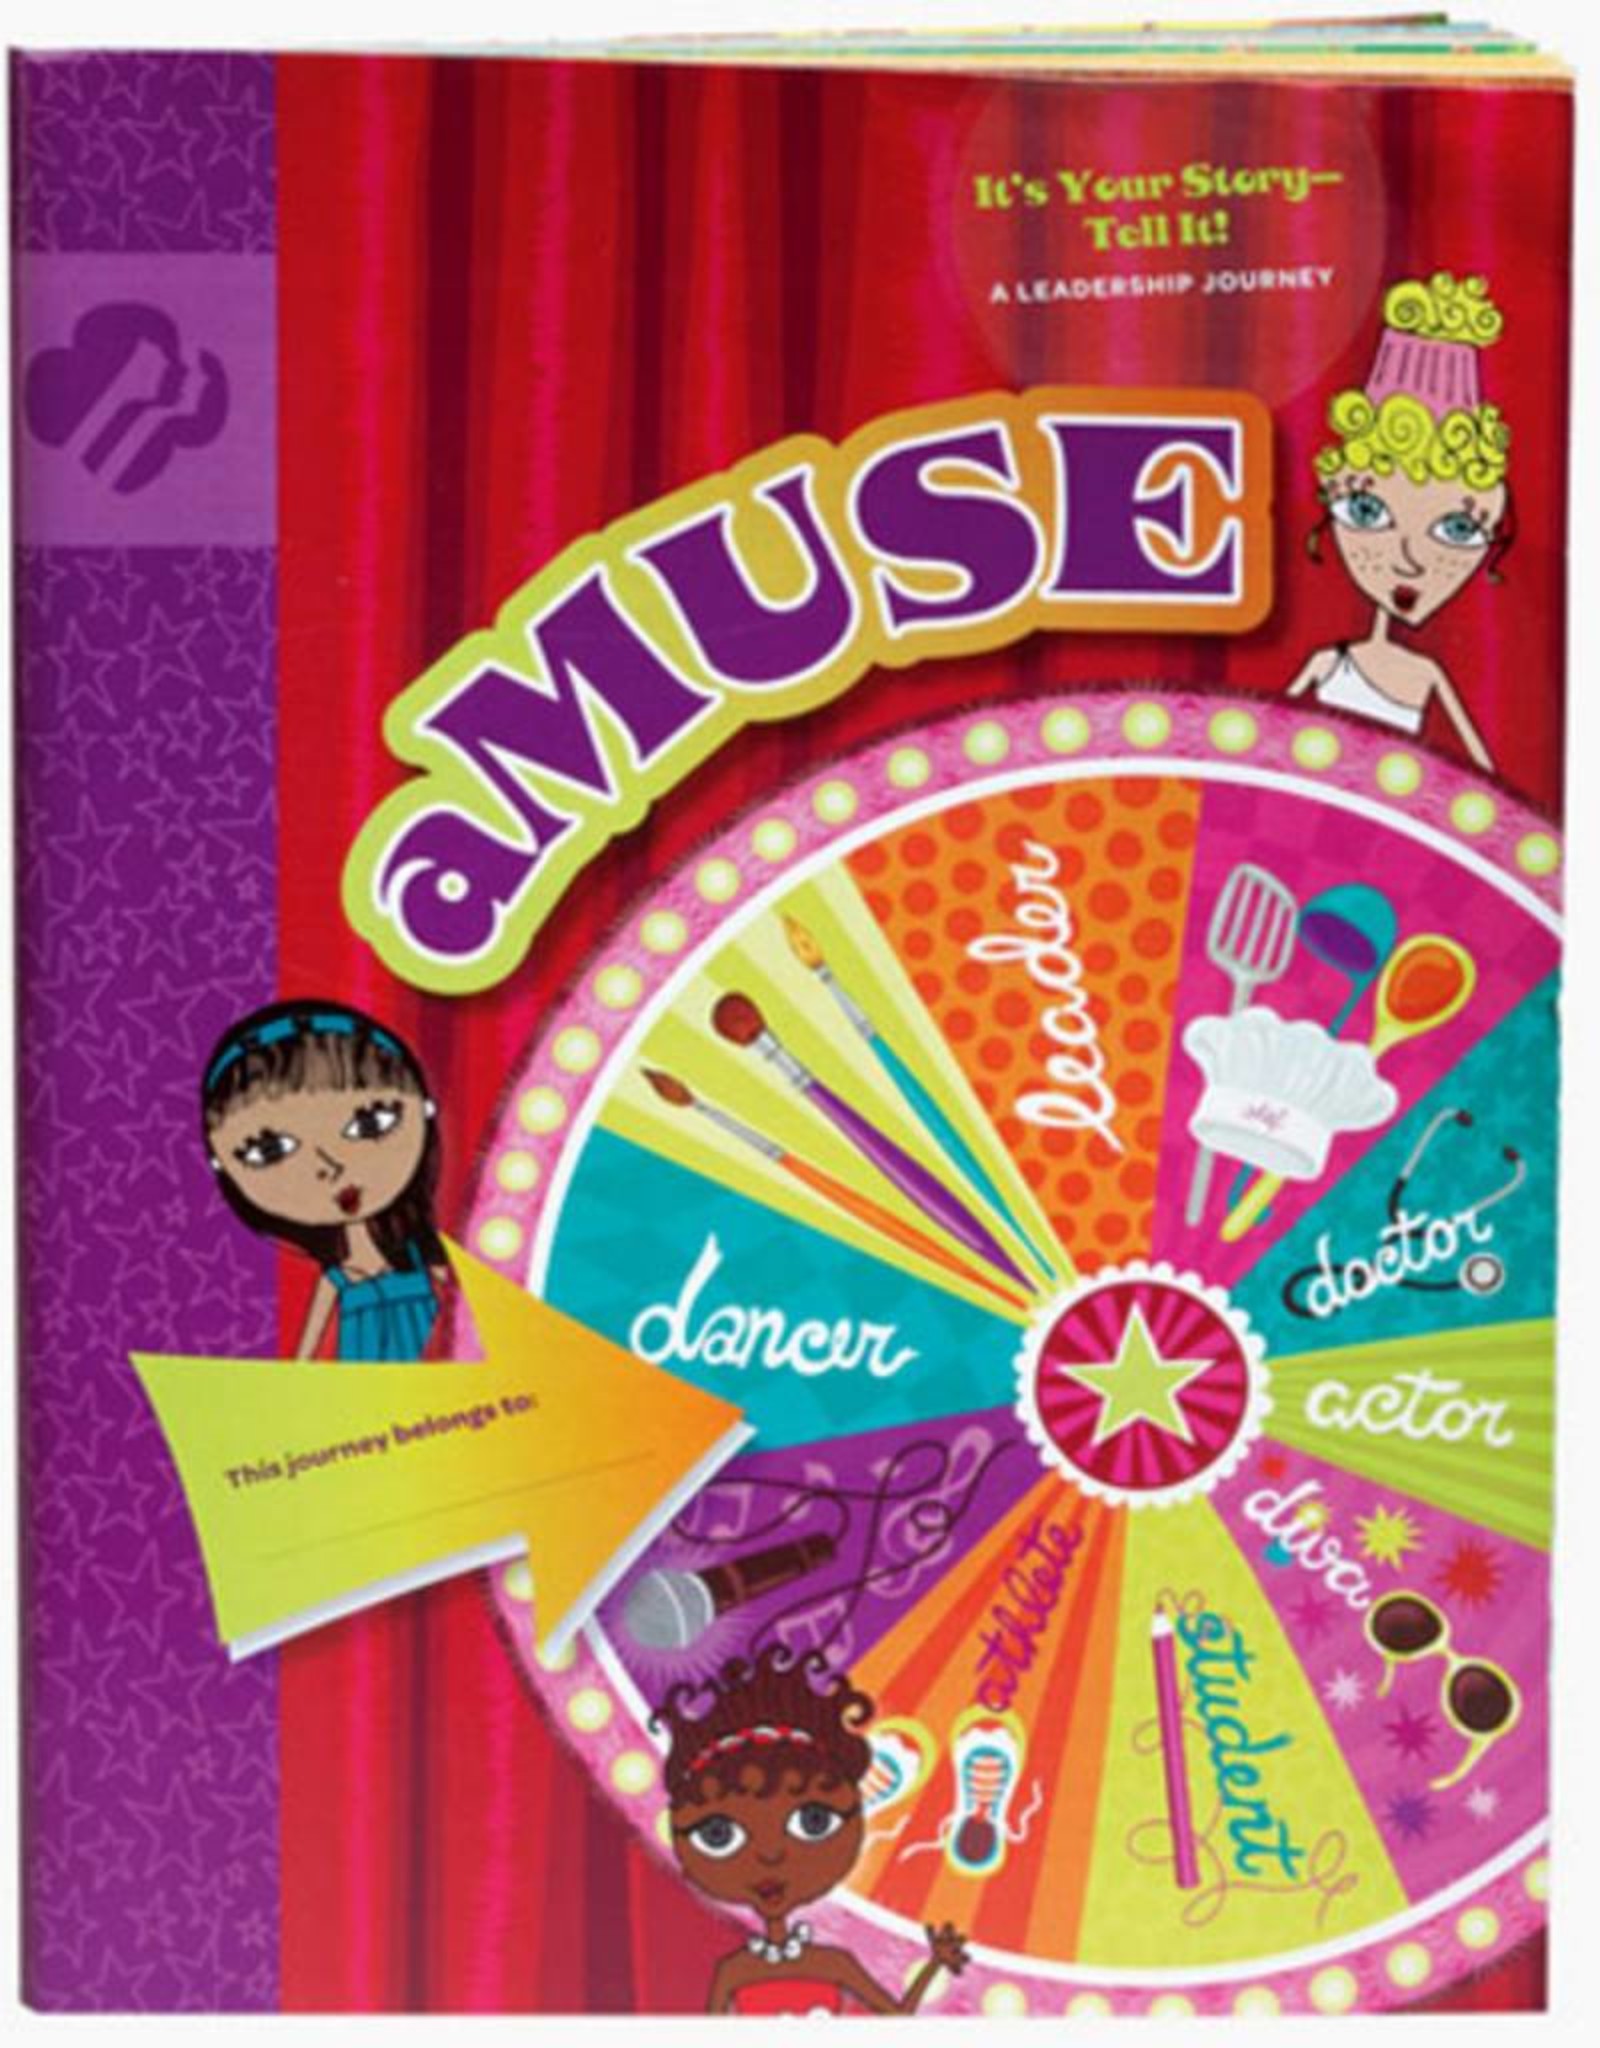 GIRL SCOUTS OF THE USA Junior Journey aMuse Book